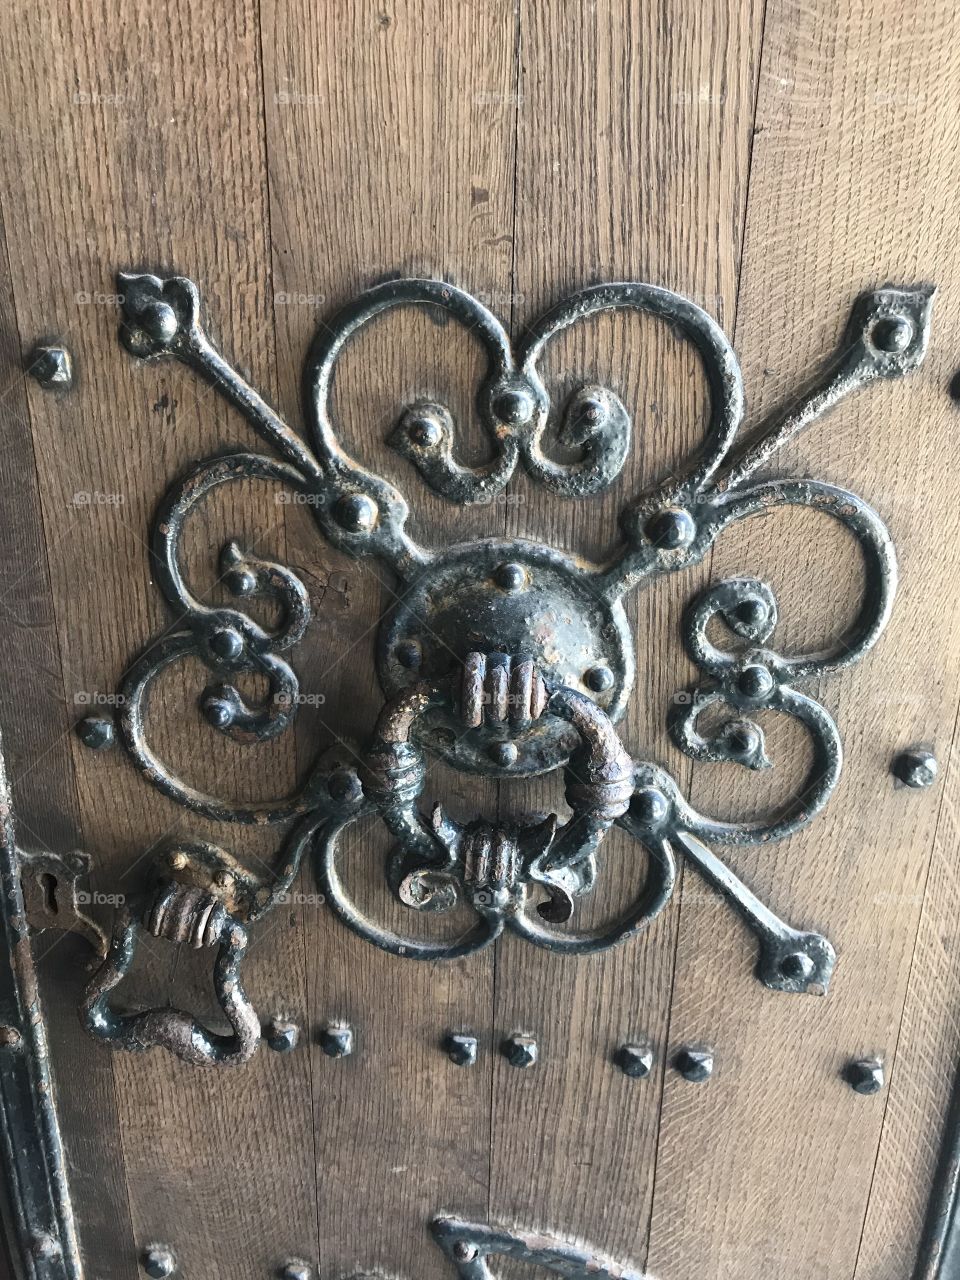 One of the main doors of the very beautiful Truro Cathedral, what a classic one this is the attention to detail is a phenomenon.